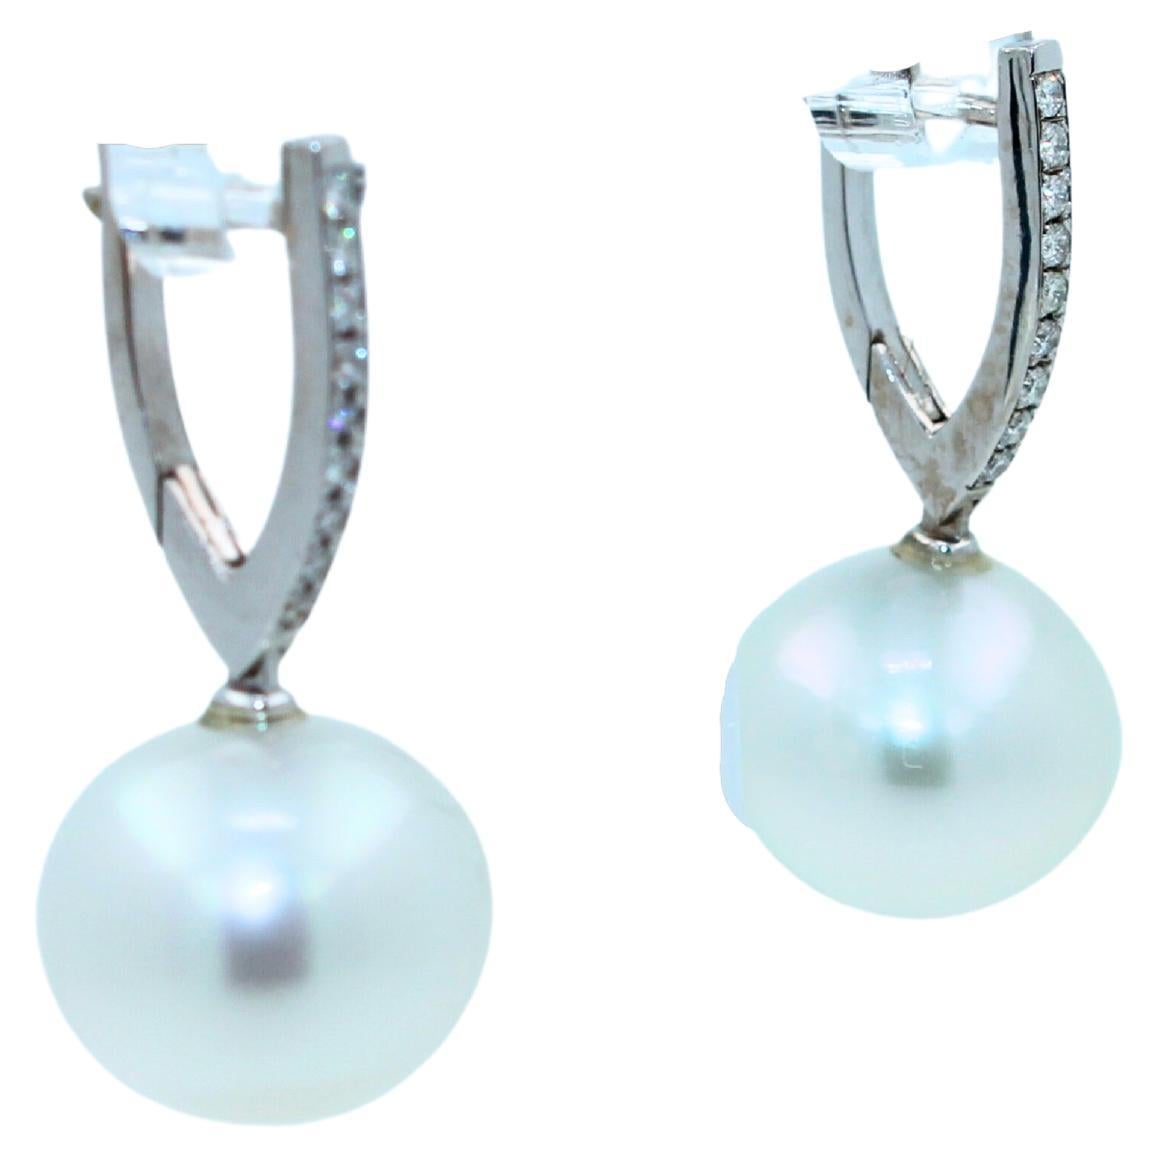 White AAA Quality South Sea Pearls
Length 15MM Width 16MM (Estimate for both)
Striking Silvery Hue with Light Blue Iridescent  Tones
Very Reflective Surface - Almost Mirror-Like 
Special Rare Shapes - Wide Ellipse - Horizontal Sphere Form
0.50 cts